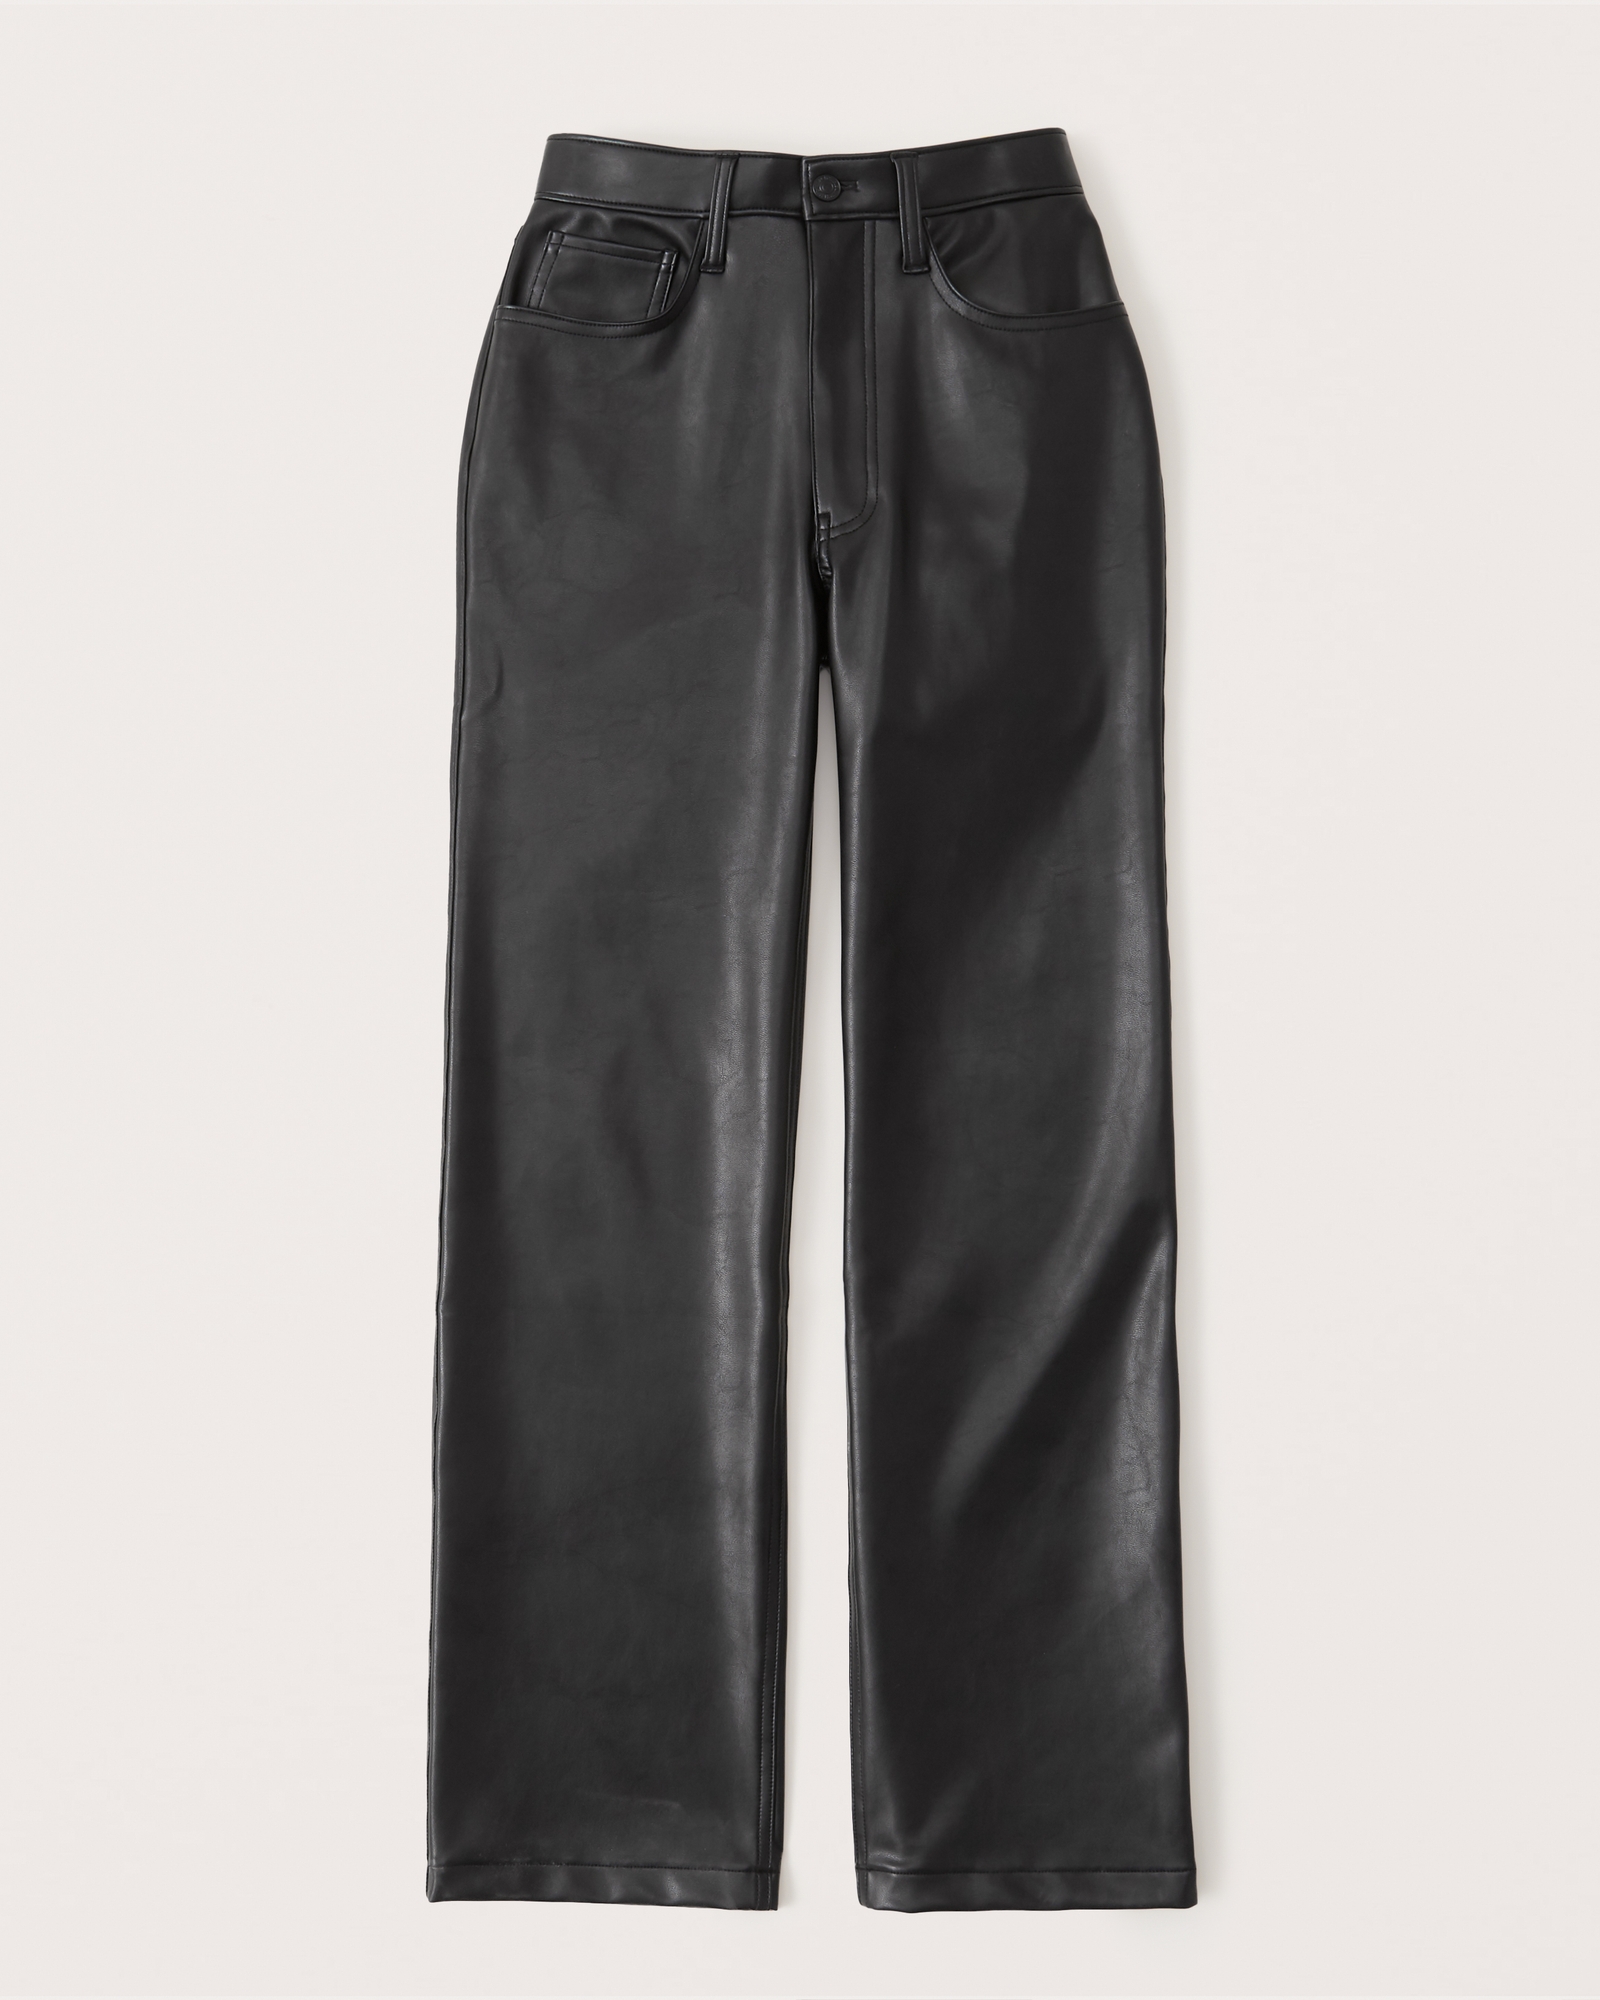 Hollister Leather Pants Black Size 4 - $15 (75% Off Retail) - From